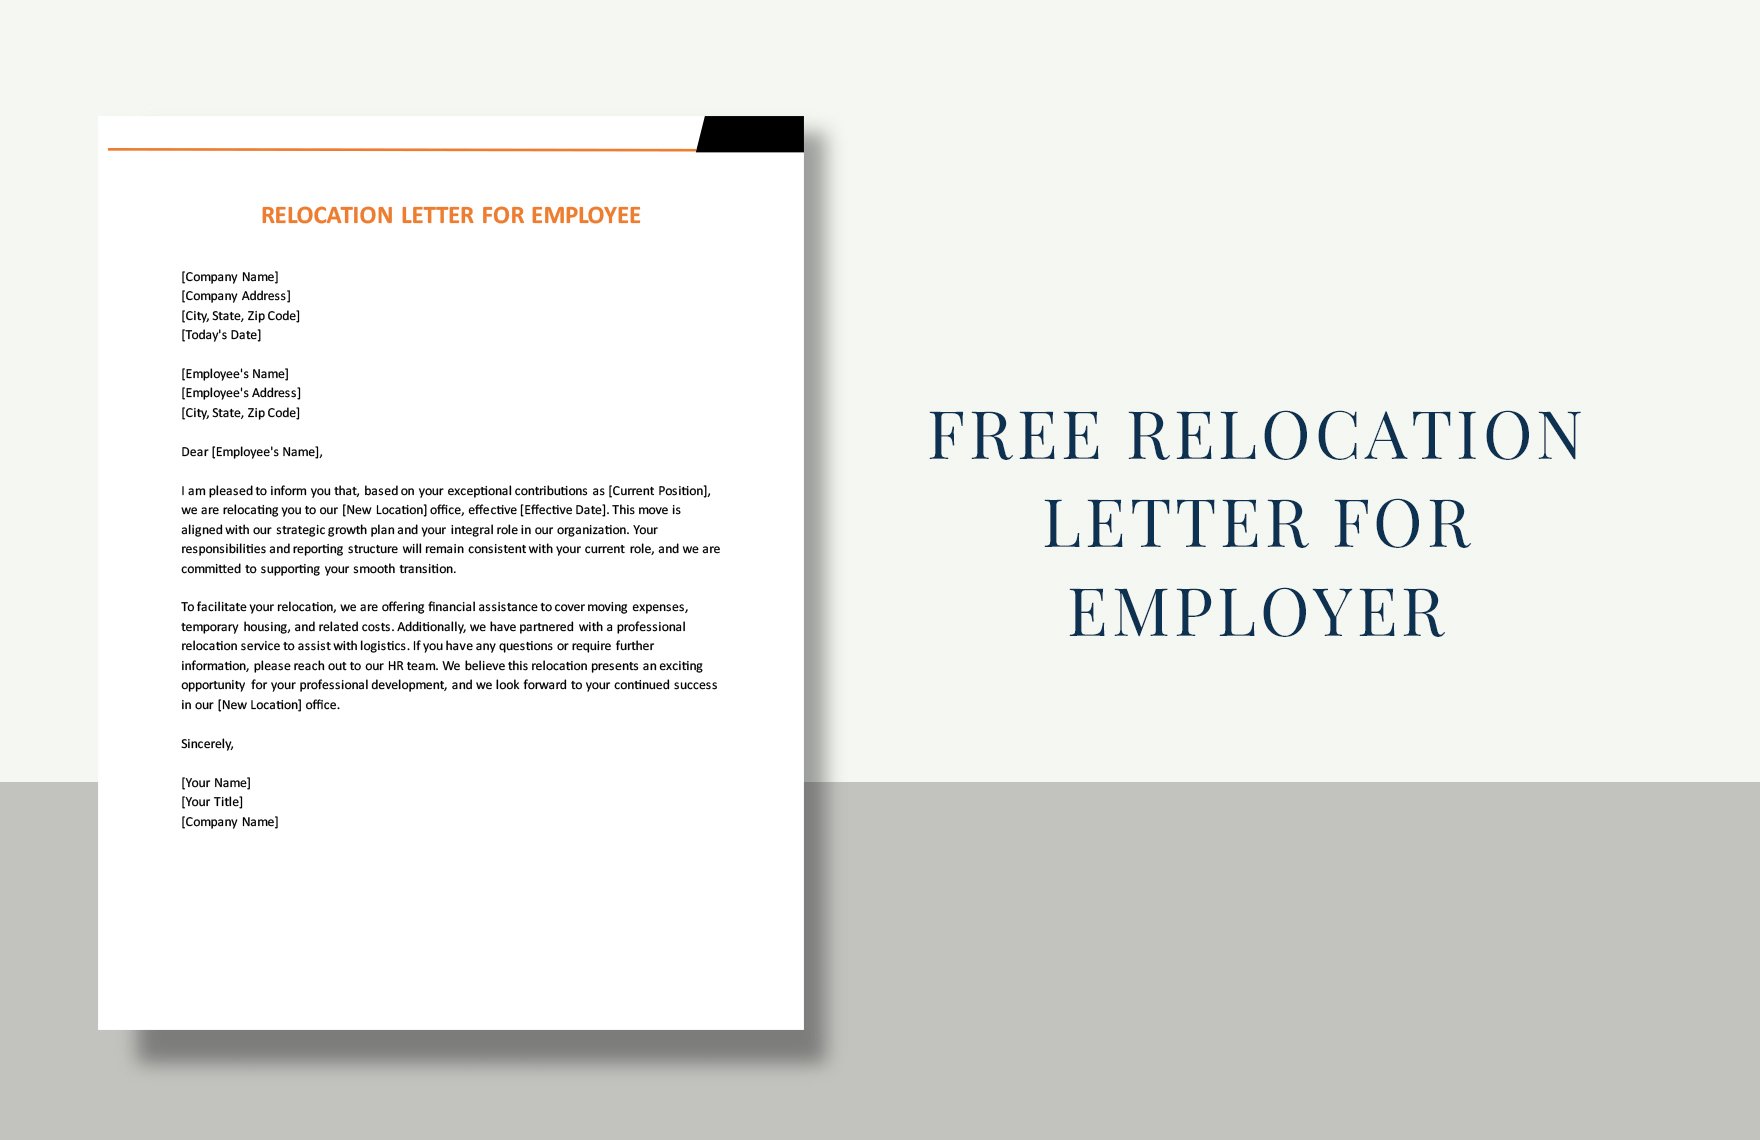 Relocation Letter For Employee in Word, Google Docs, PDF